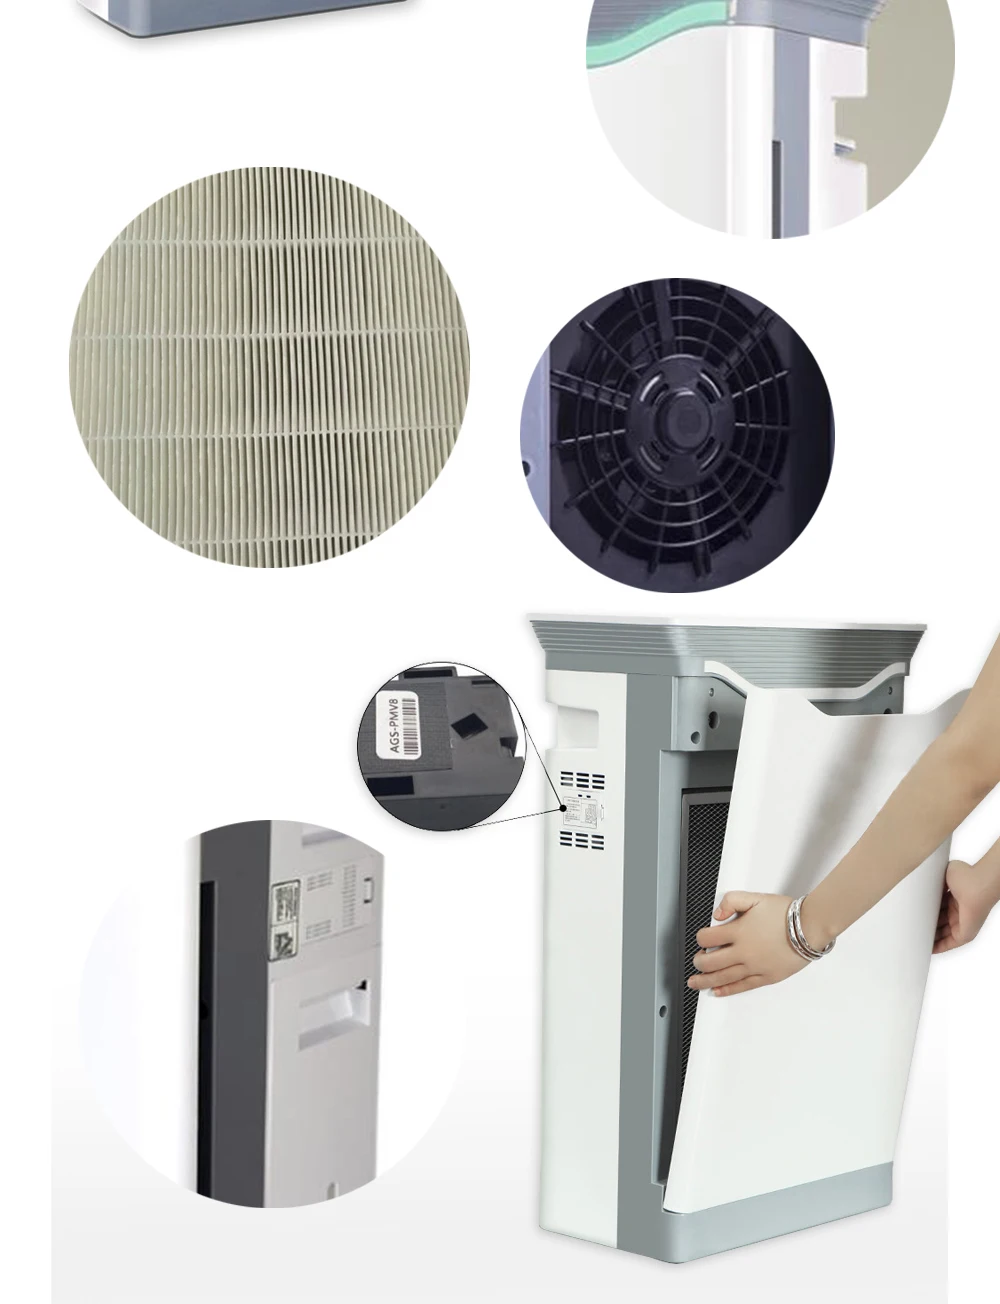 dust filters filter factory hepa desktop commercial cleaner china brands bionaire bacteria at home anion air purifier and